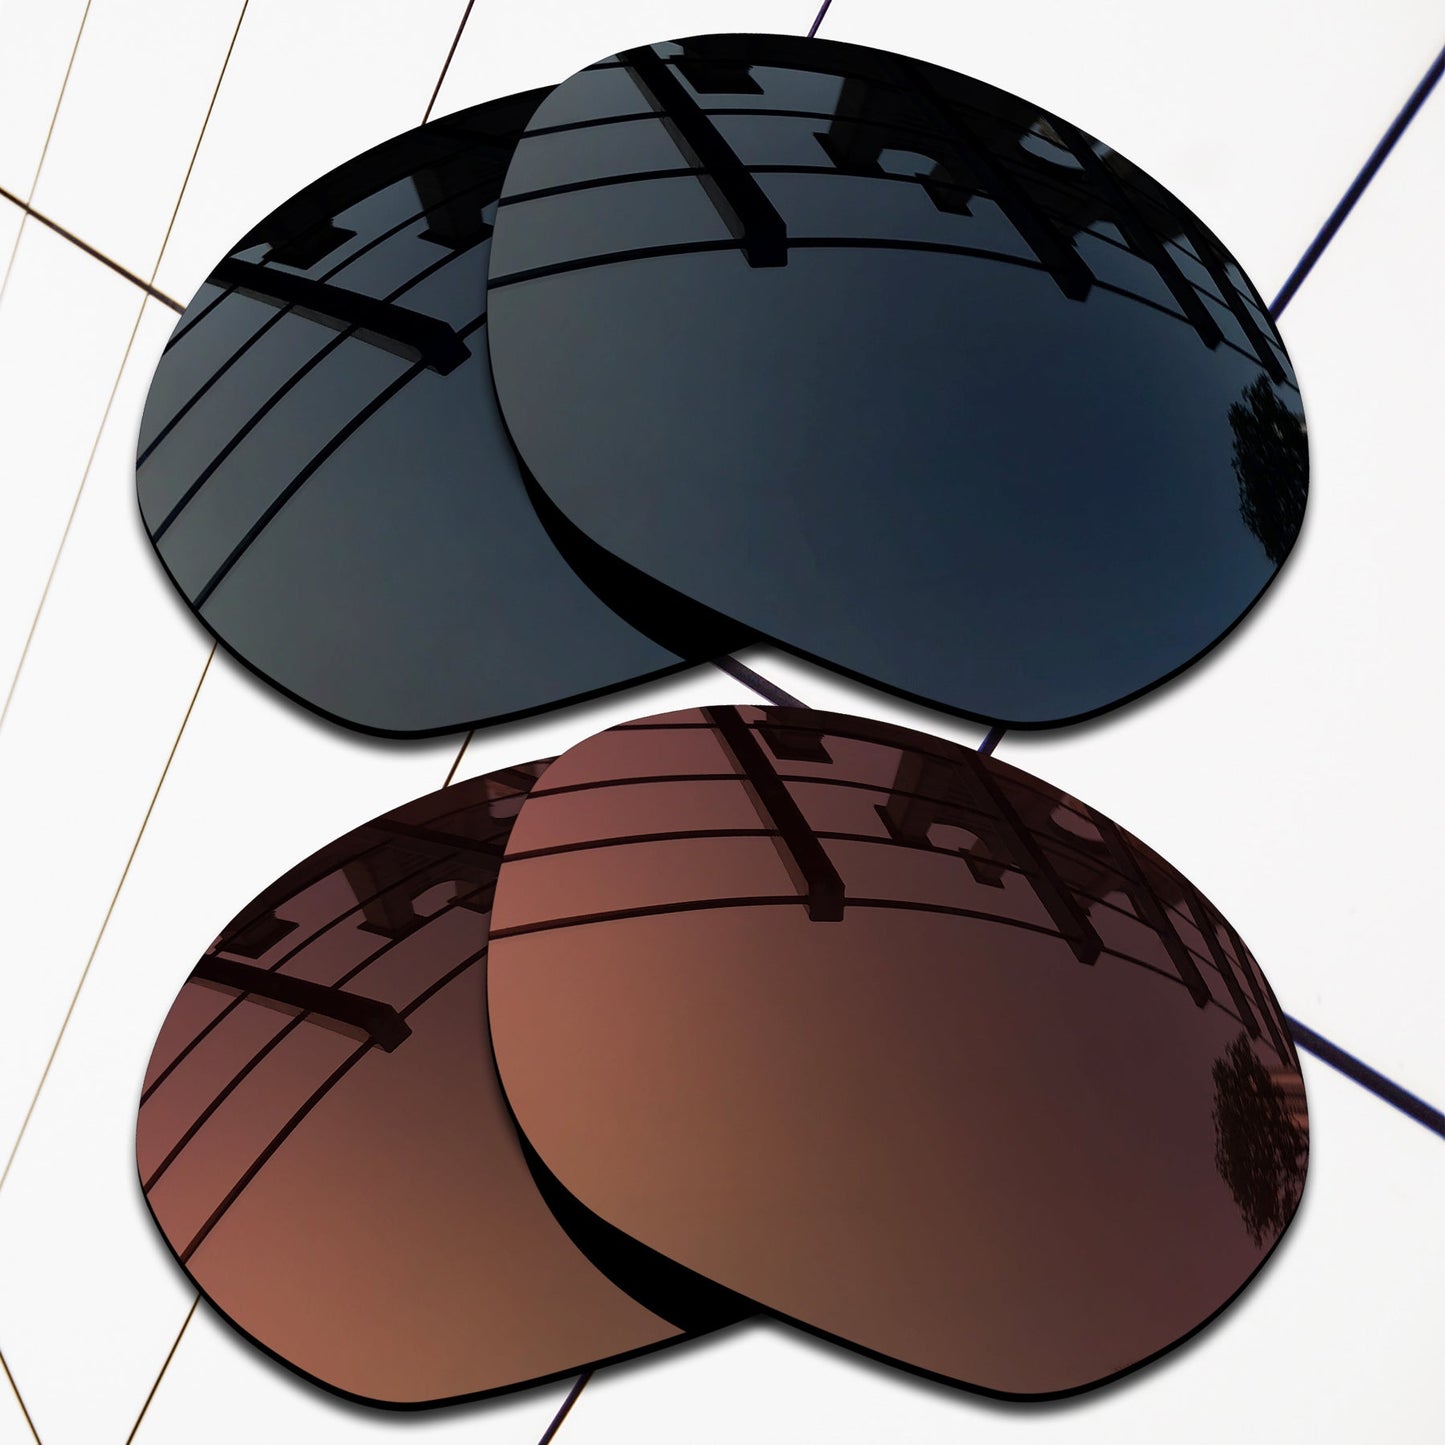 Polarized Replacement Lenses for Oakley Warm Up Sunglasses